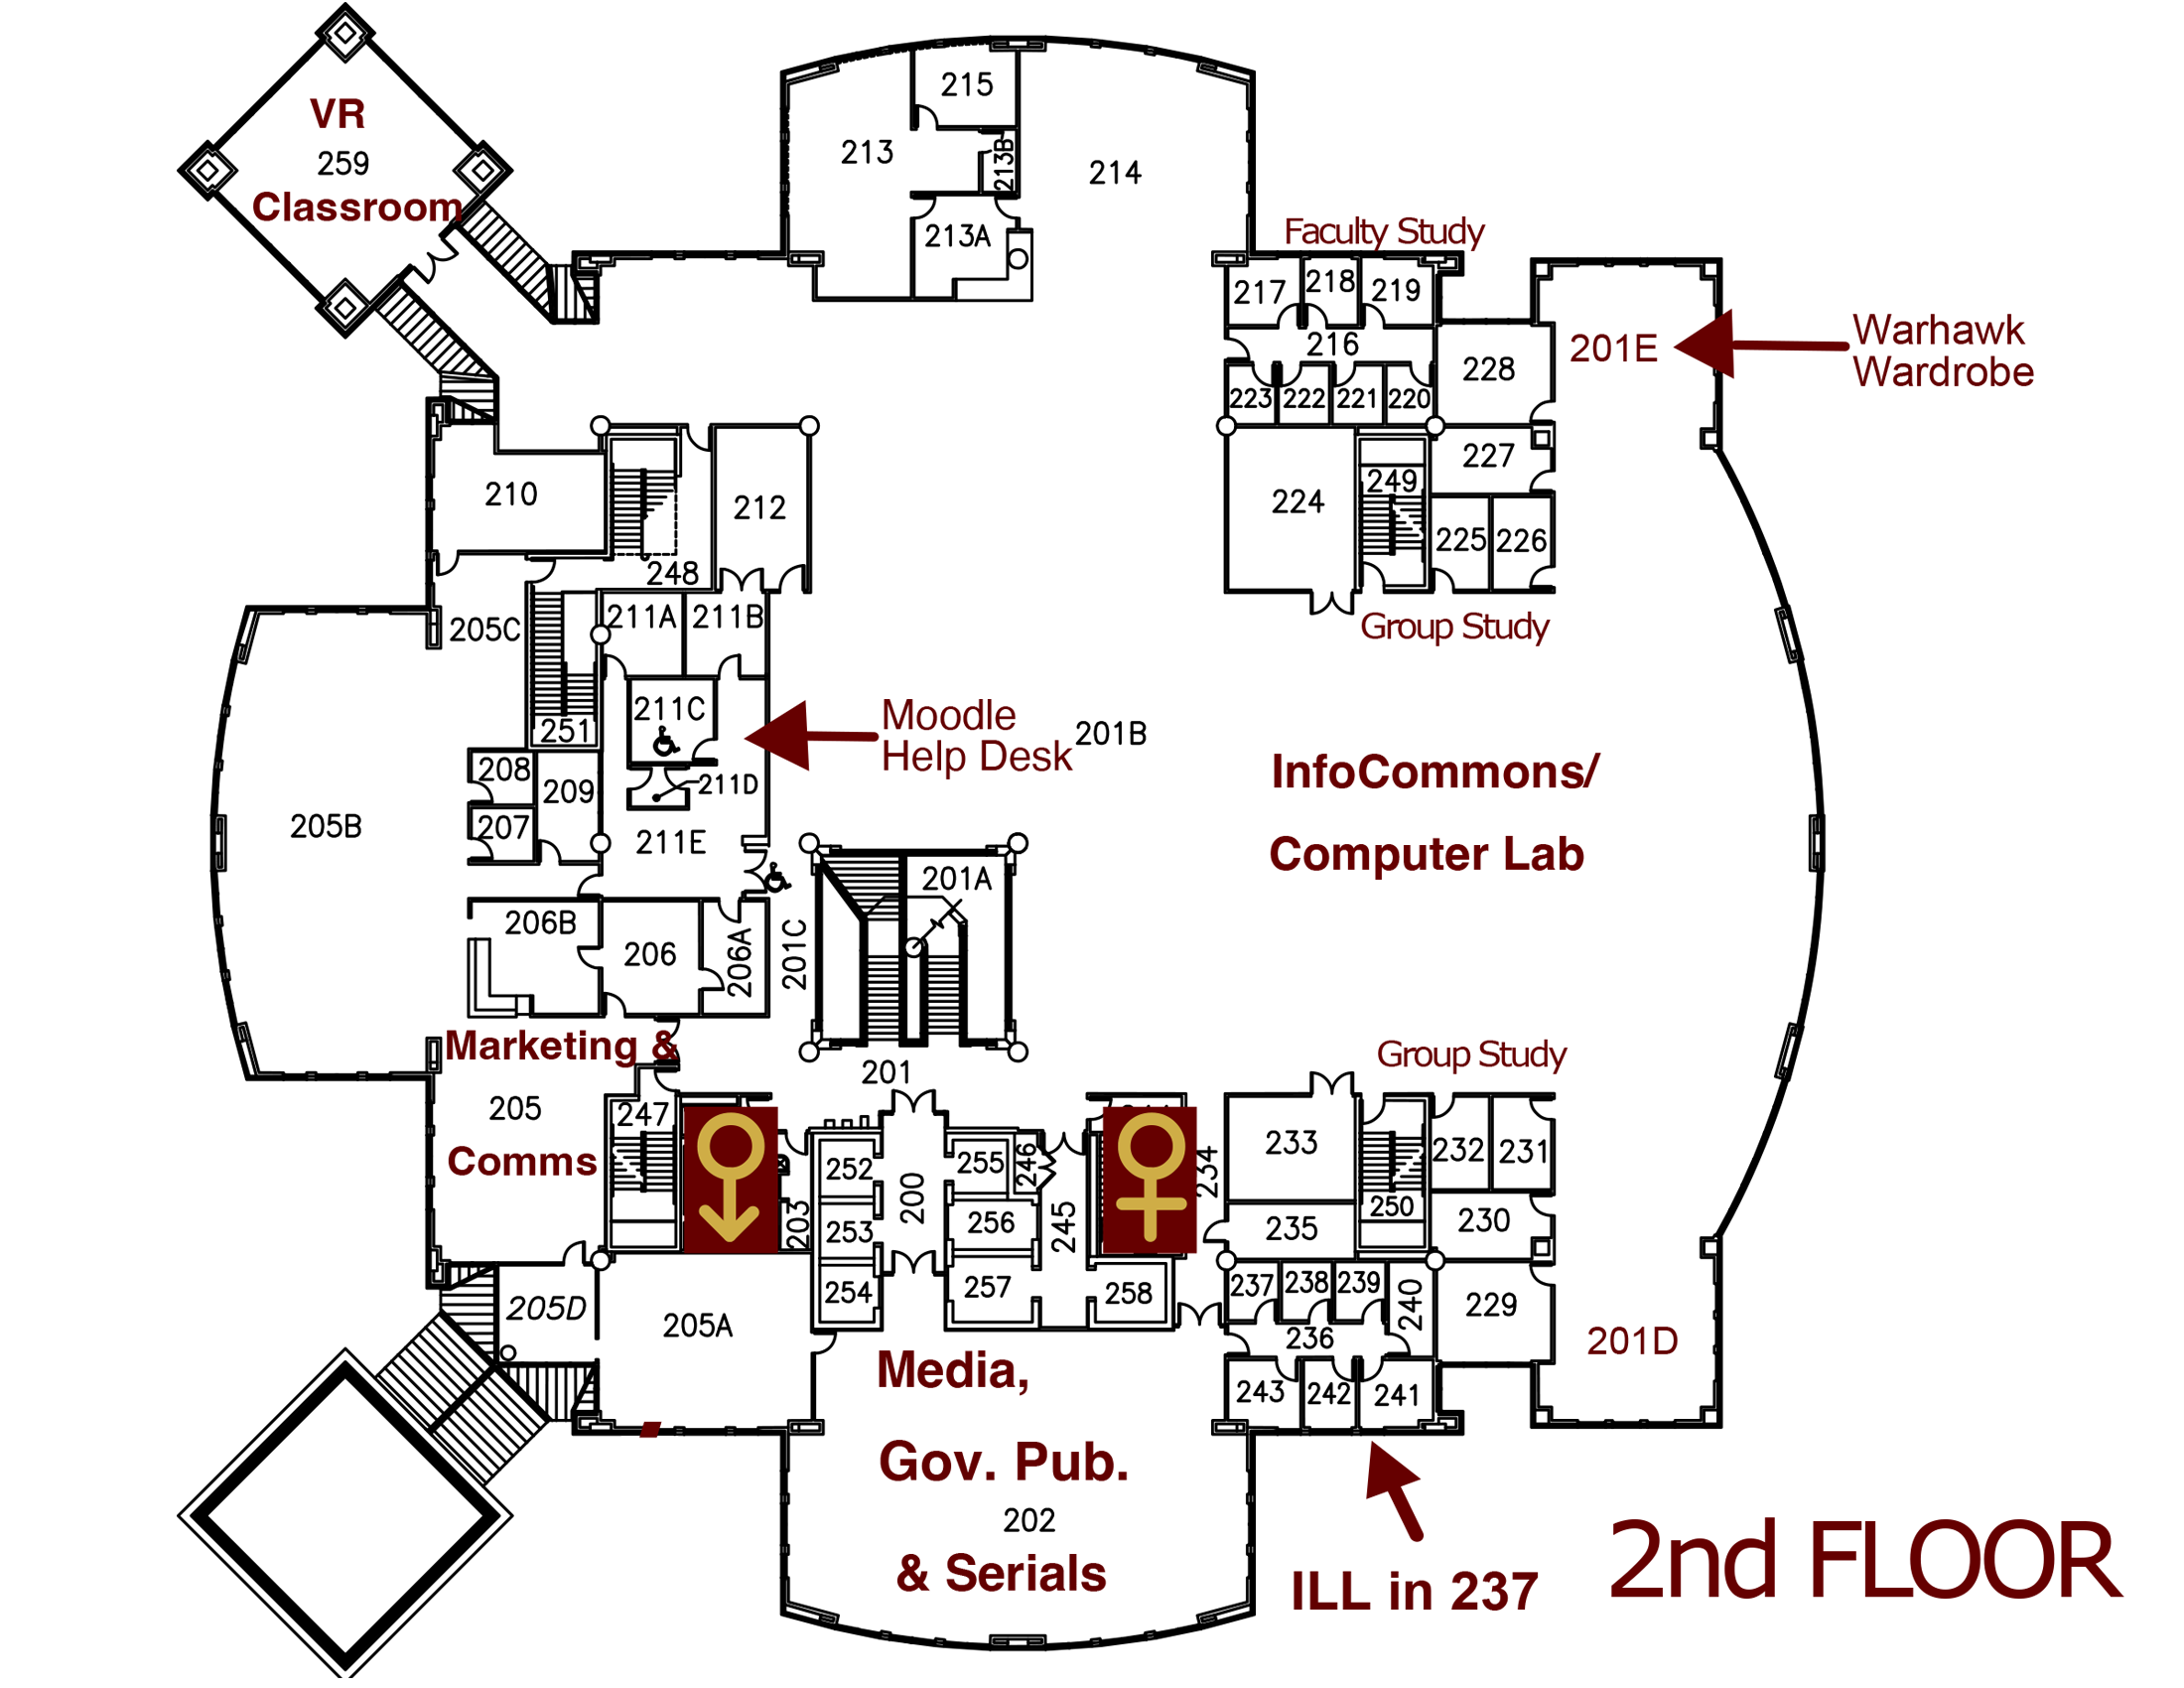 second floor library map see text list below